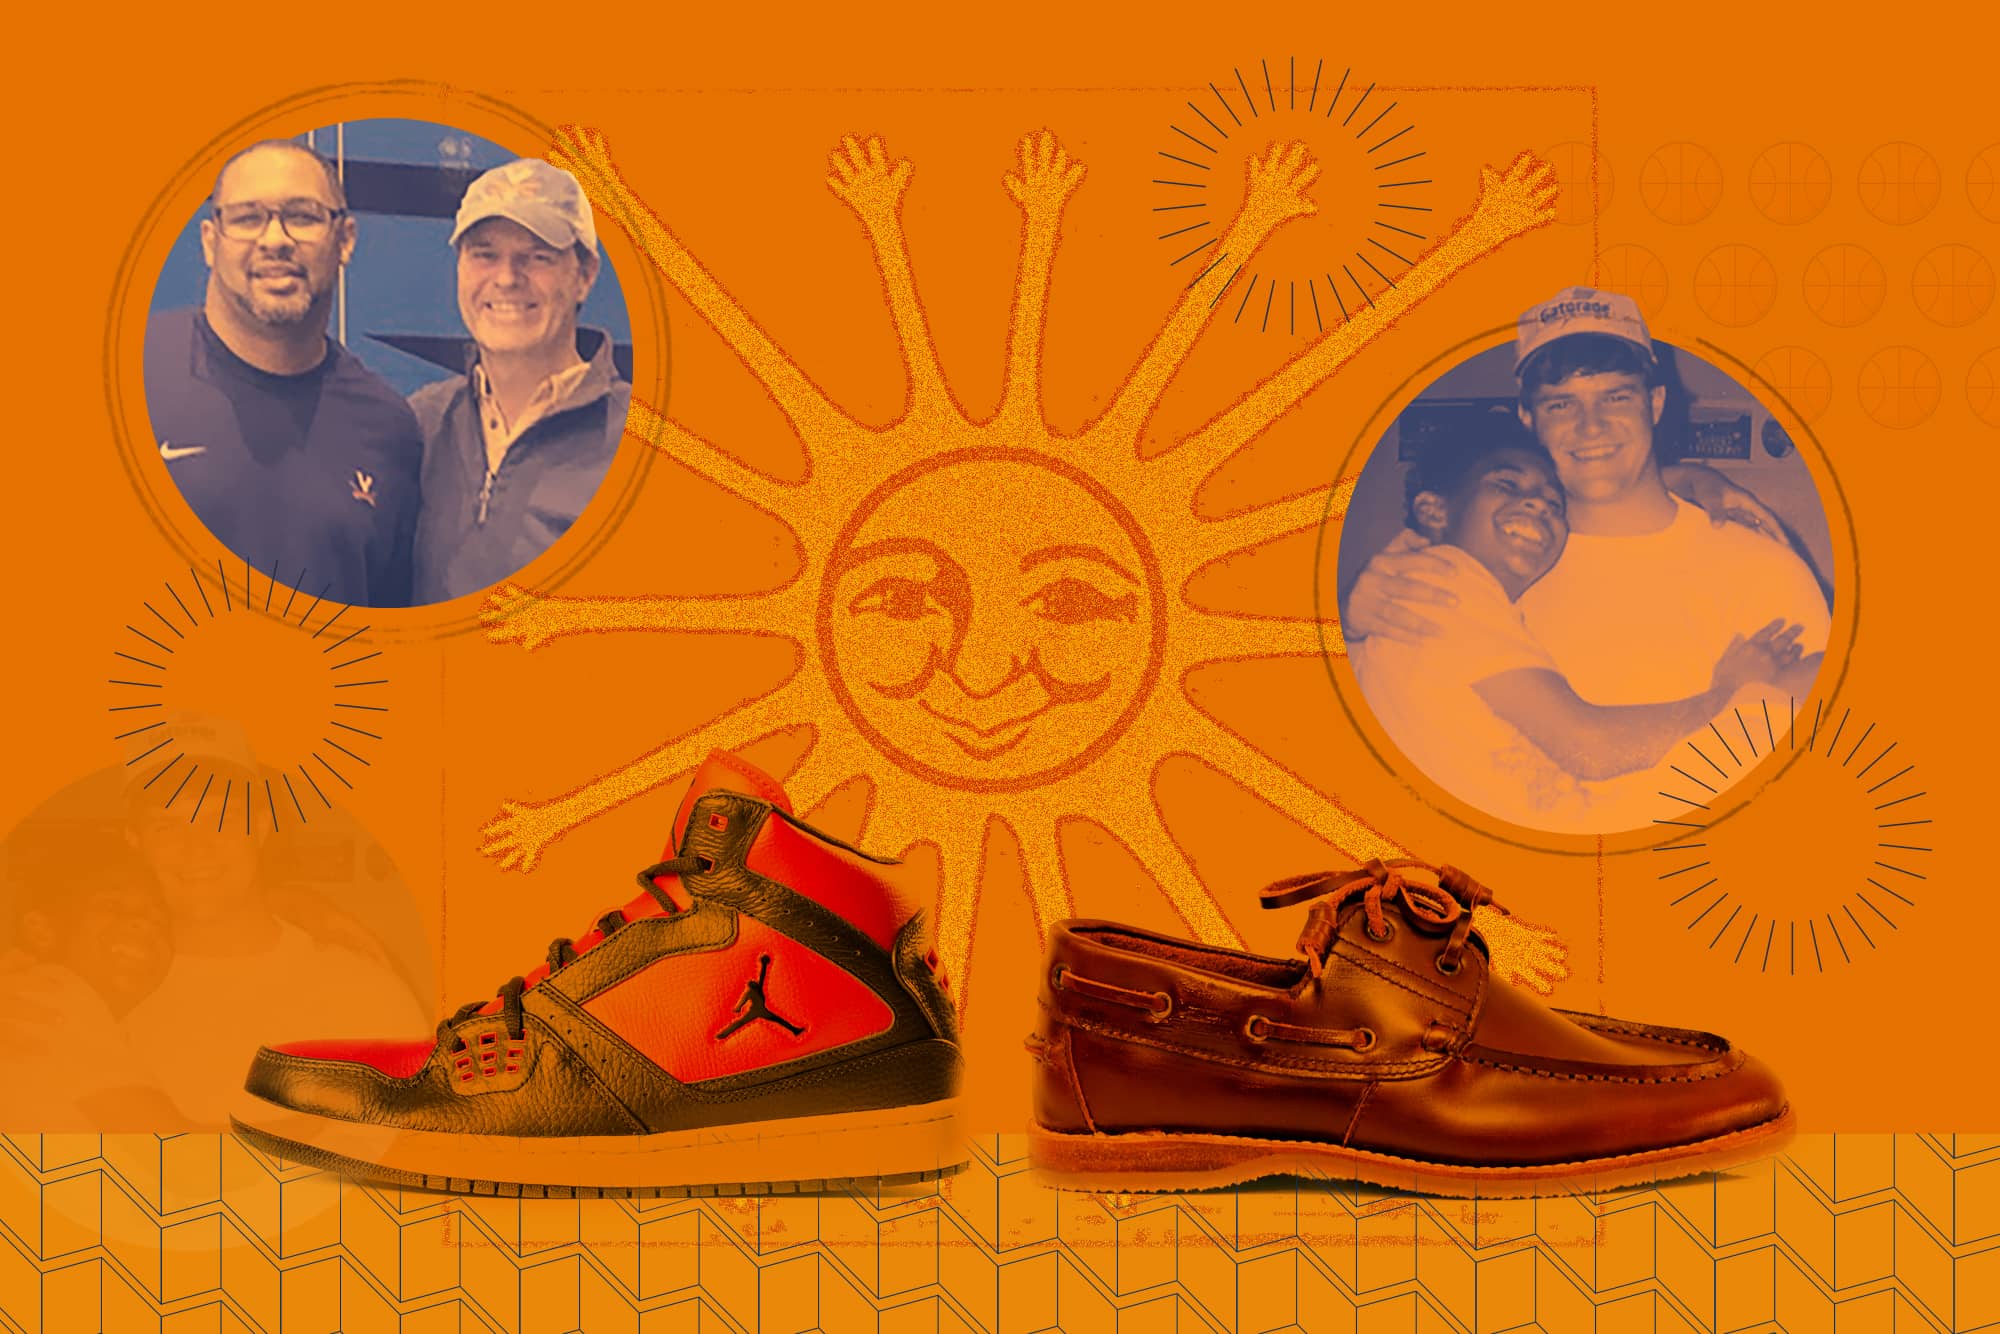 Sun with a current picture of Walldorf and Malnowski and an older picture of Walldorf and Malnowski with a basketball shoe and dress shoe directly beneath the pictures.